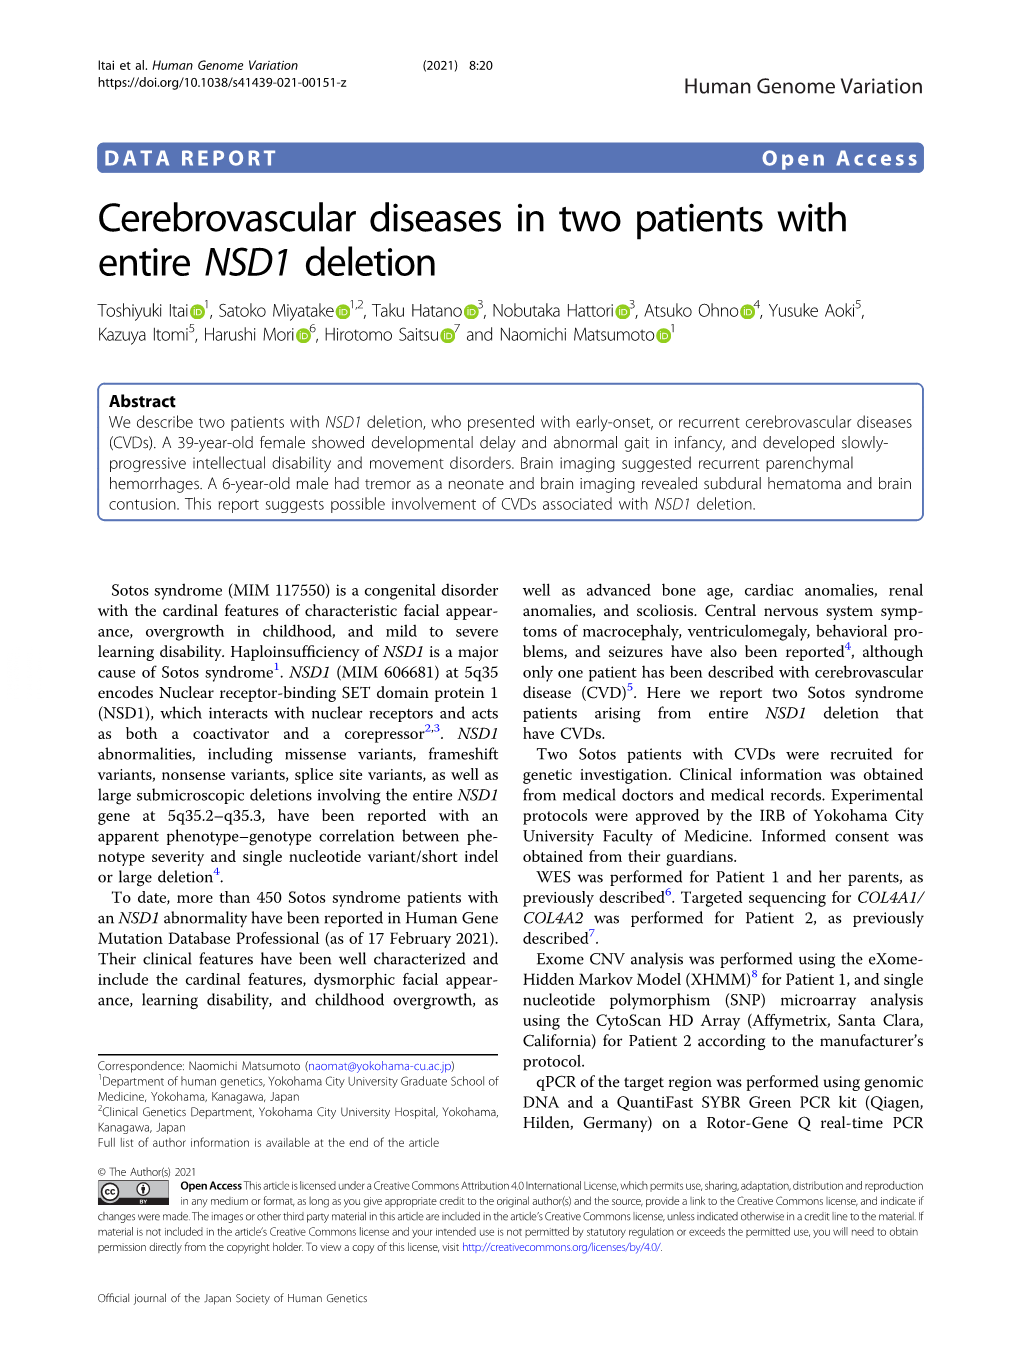 Cerebrovascular Diseases in Two Patients with Entire NSD1 Deletion